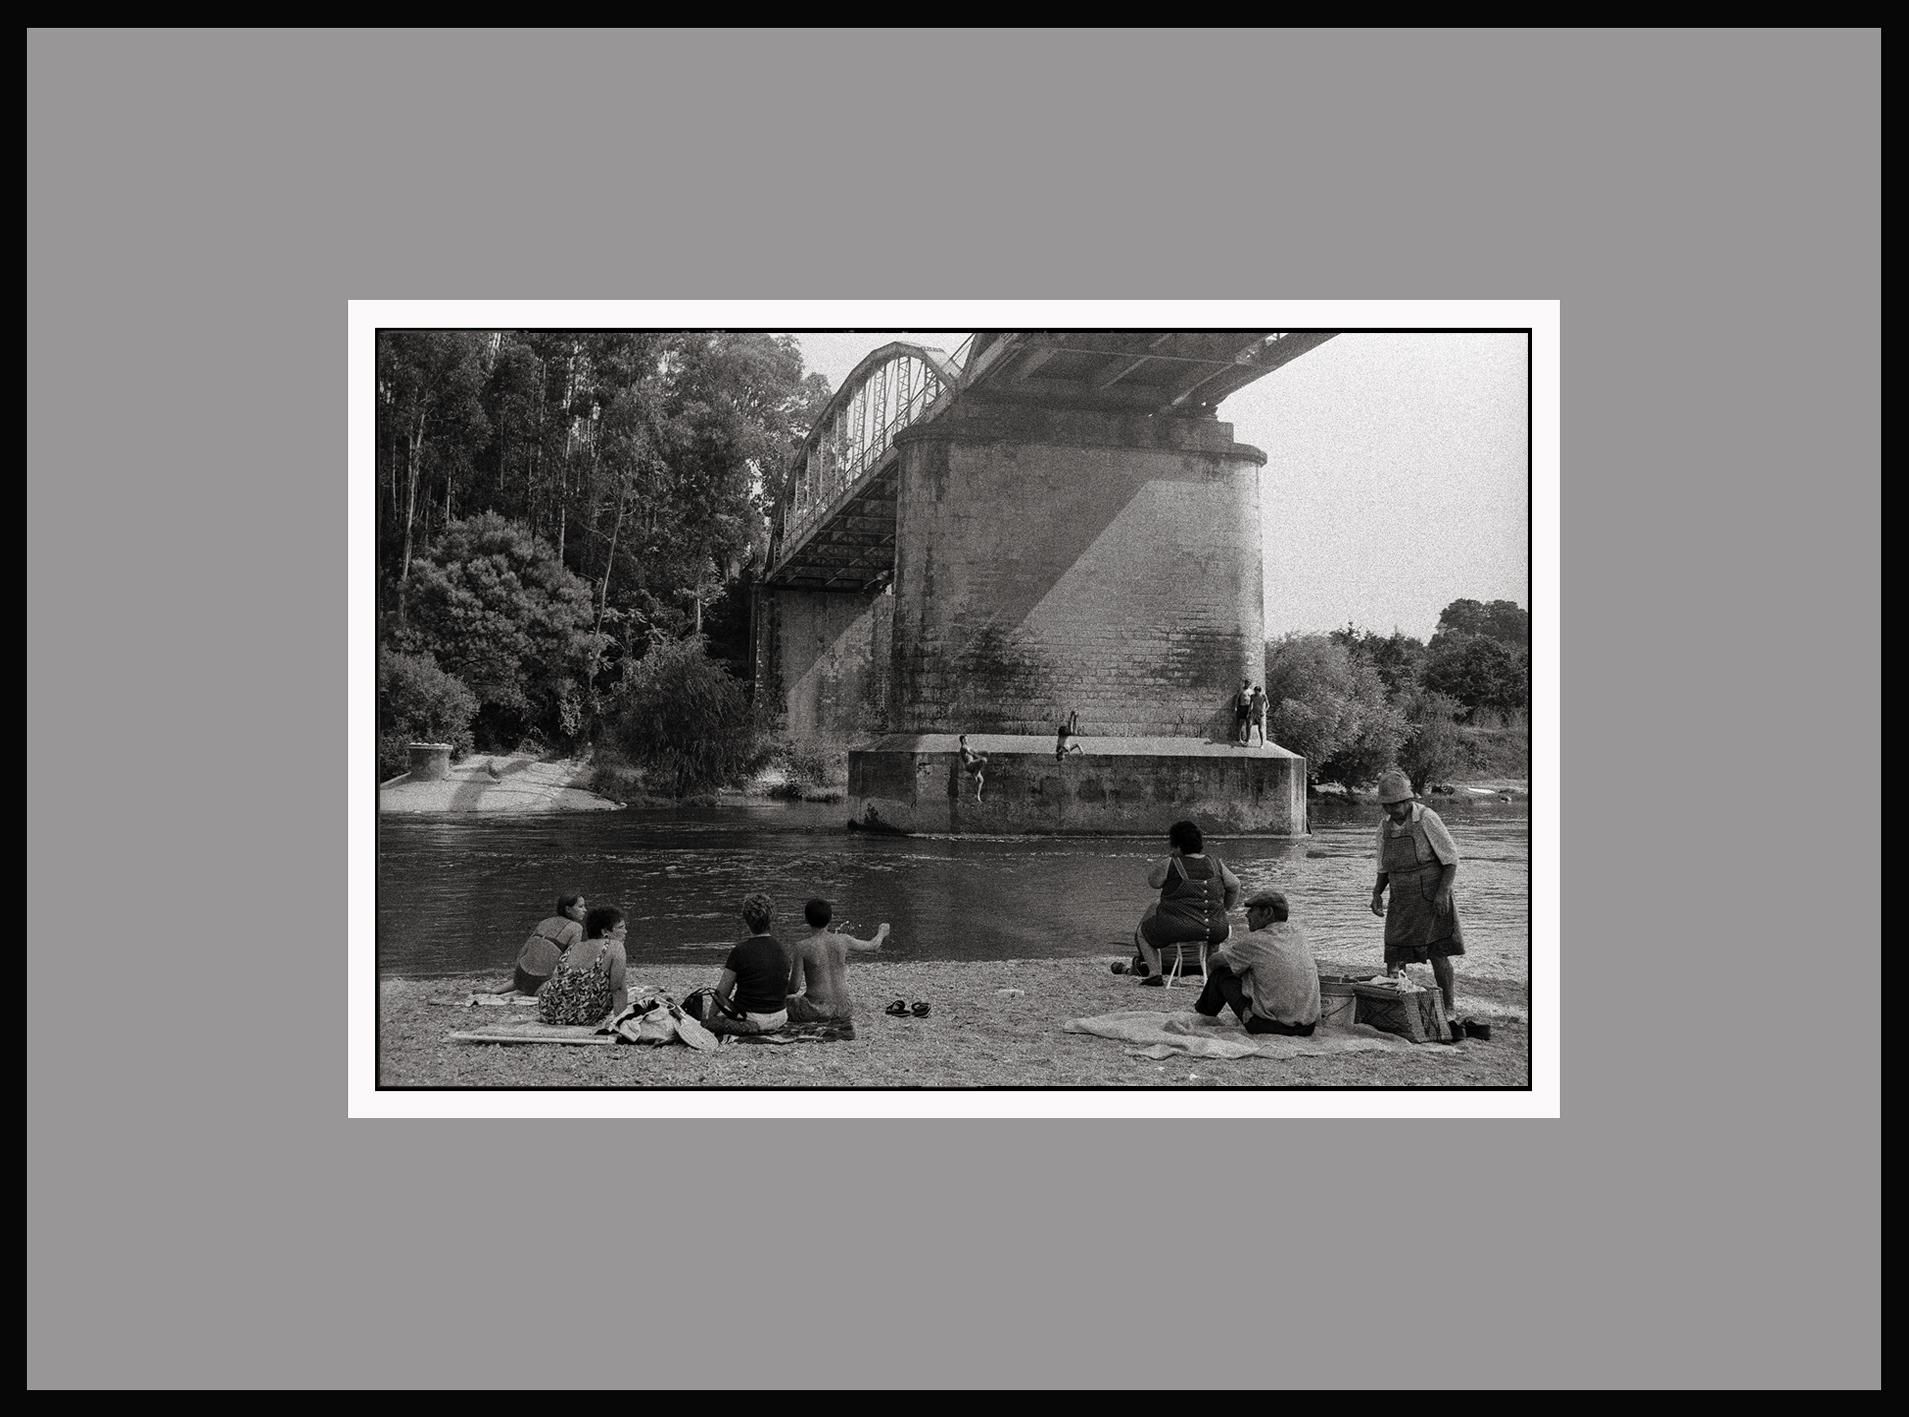 River Jumping - Portugal 2000 - Gelatin Silver Print - Signed - Photograph by Ana Maria Cortesão